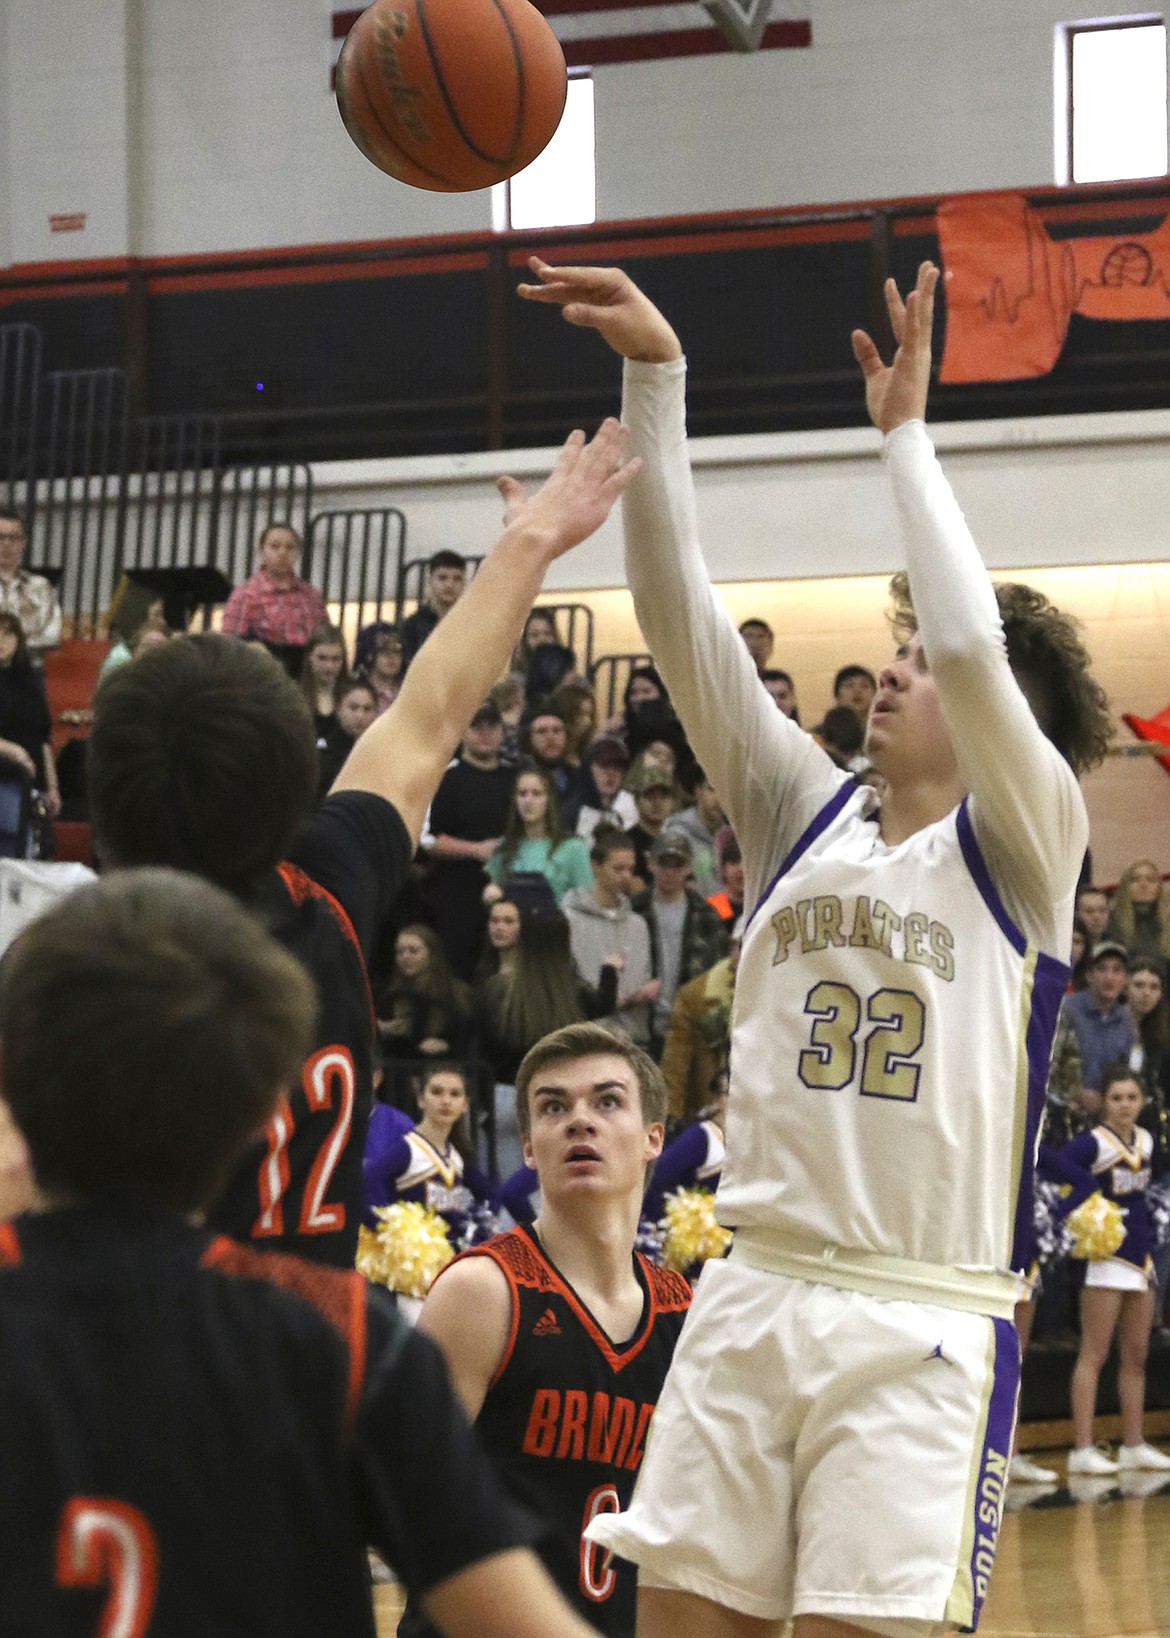 Polson Pirate Colton Graham nails a 3-pointer against Frenchtown in the opening game of the Western A Tournament in Ronan Thursday morning. (Bob Gunderson photo)